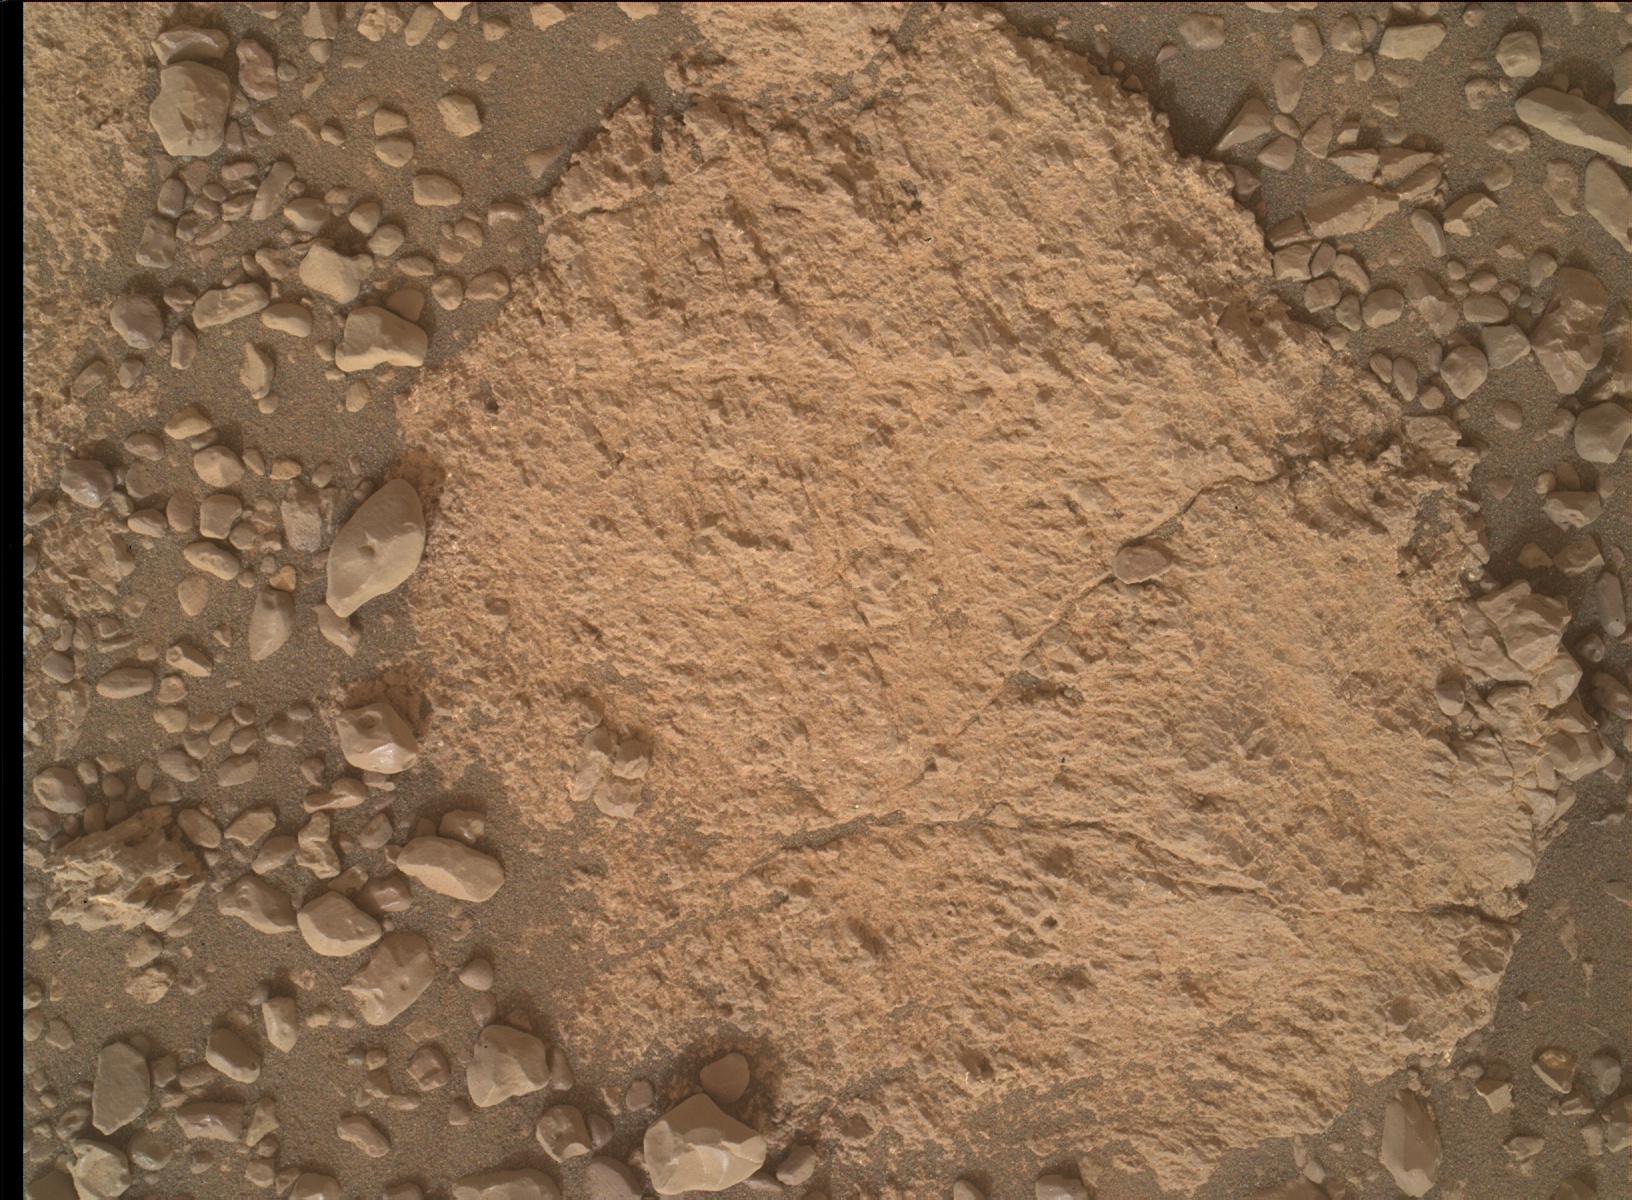 Nasa's Mars rover Curiosity acquired this image using its Mars Hand Lens Imager (MAHLI) on Sol 2295